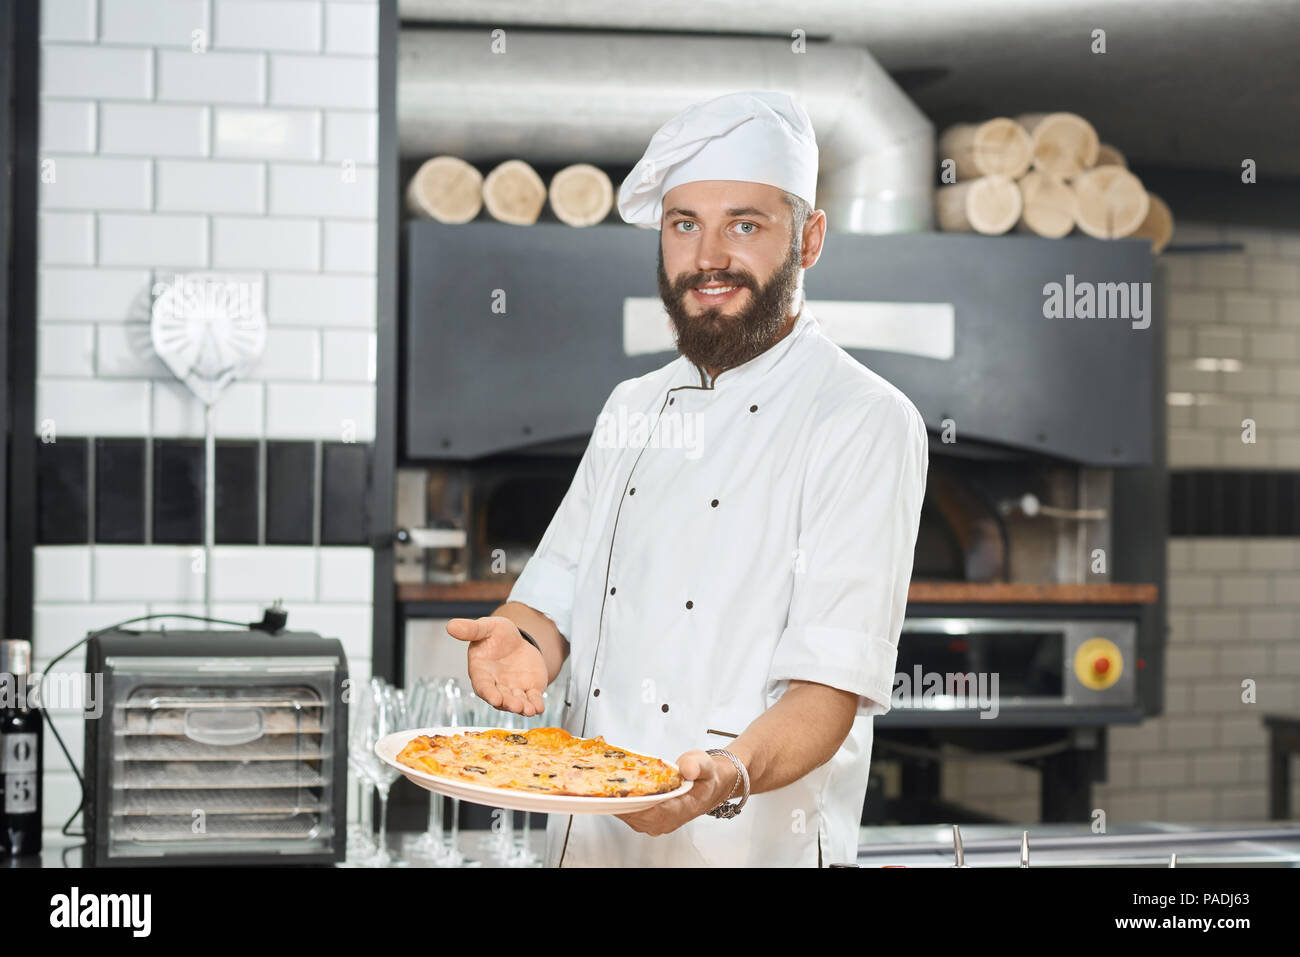 Smiling bearded pizzaiolo holding fresh baked mouthwatering pizza on big plate. Wearing white chef's tunic and a hat, working on restaurant kitchen with oven and alcohol bottles standing behind. Stock Photo